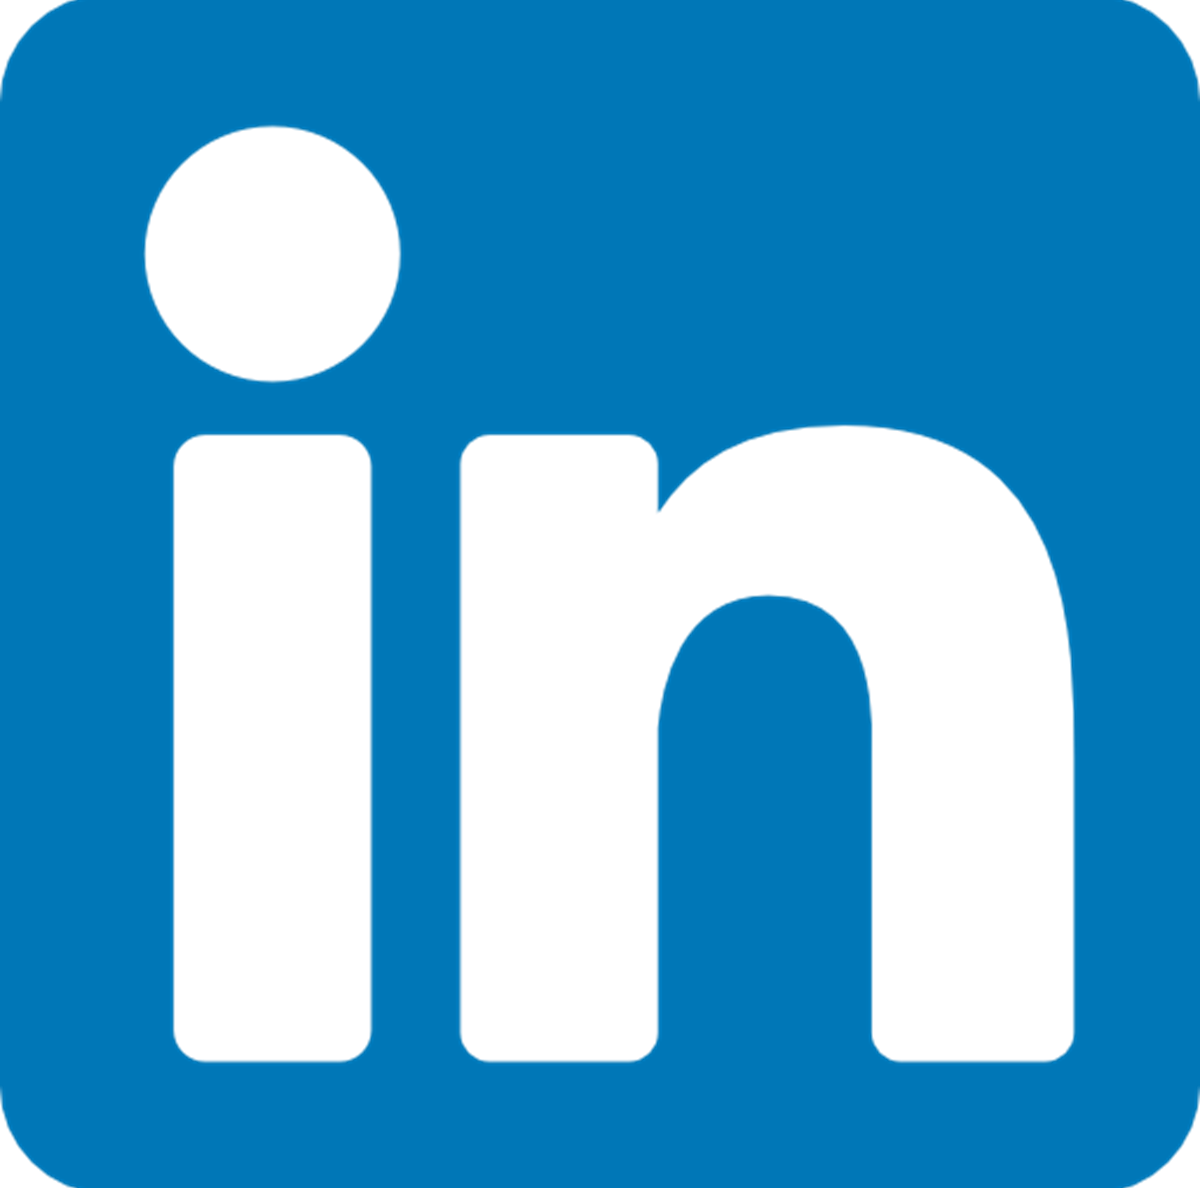 Act to connect: successfully expand your network on LinkedIn